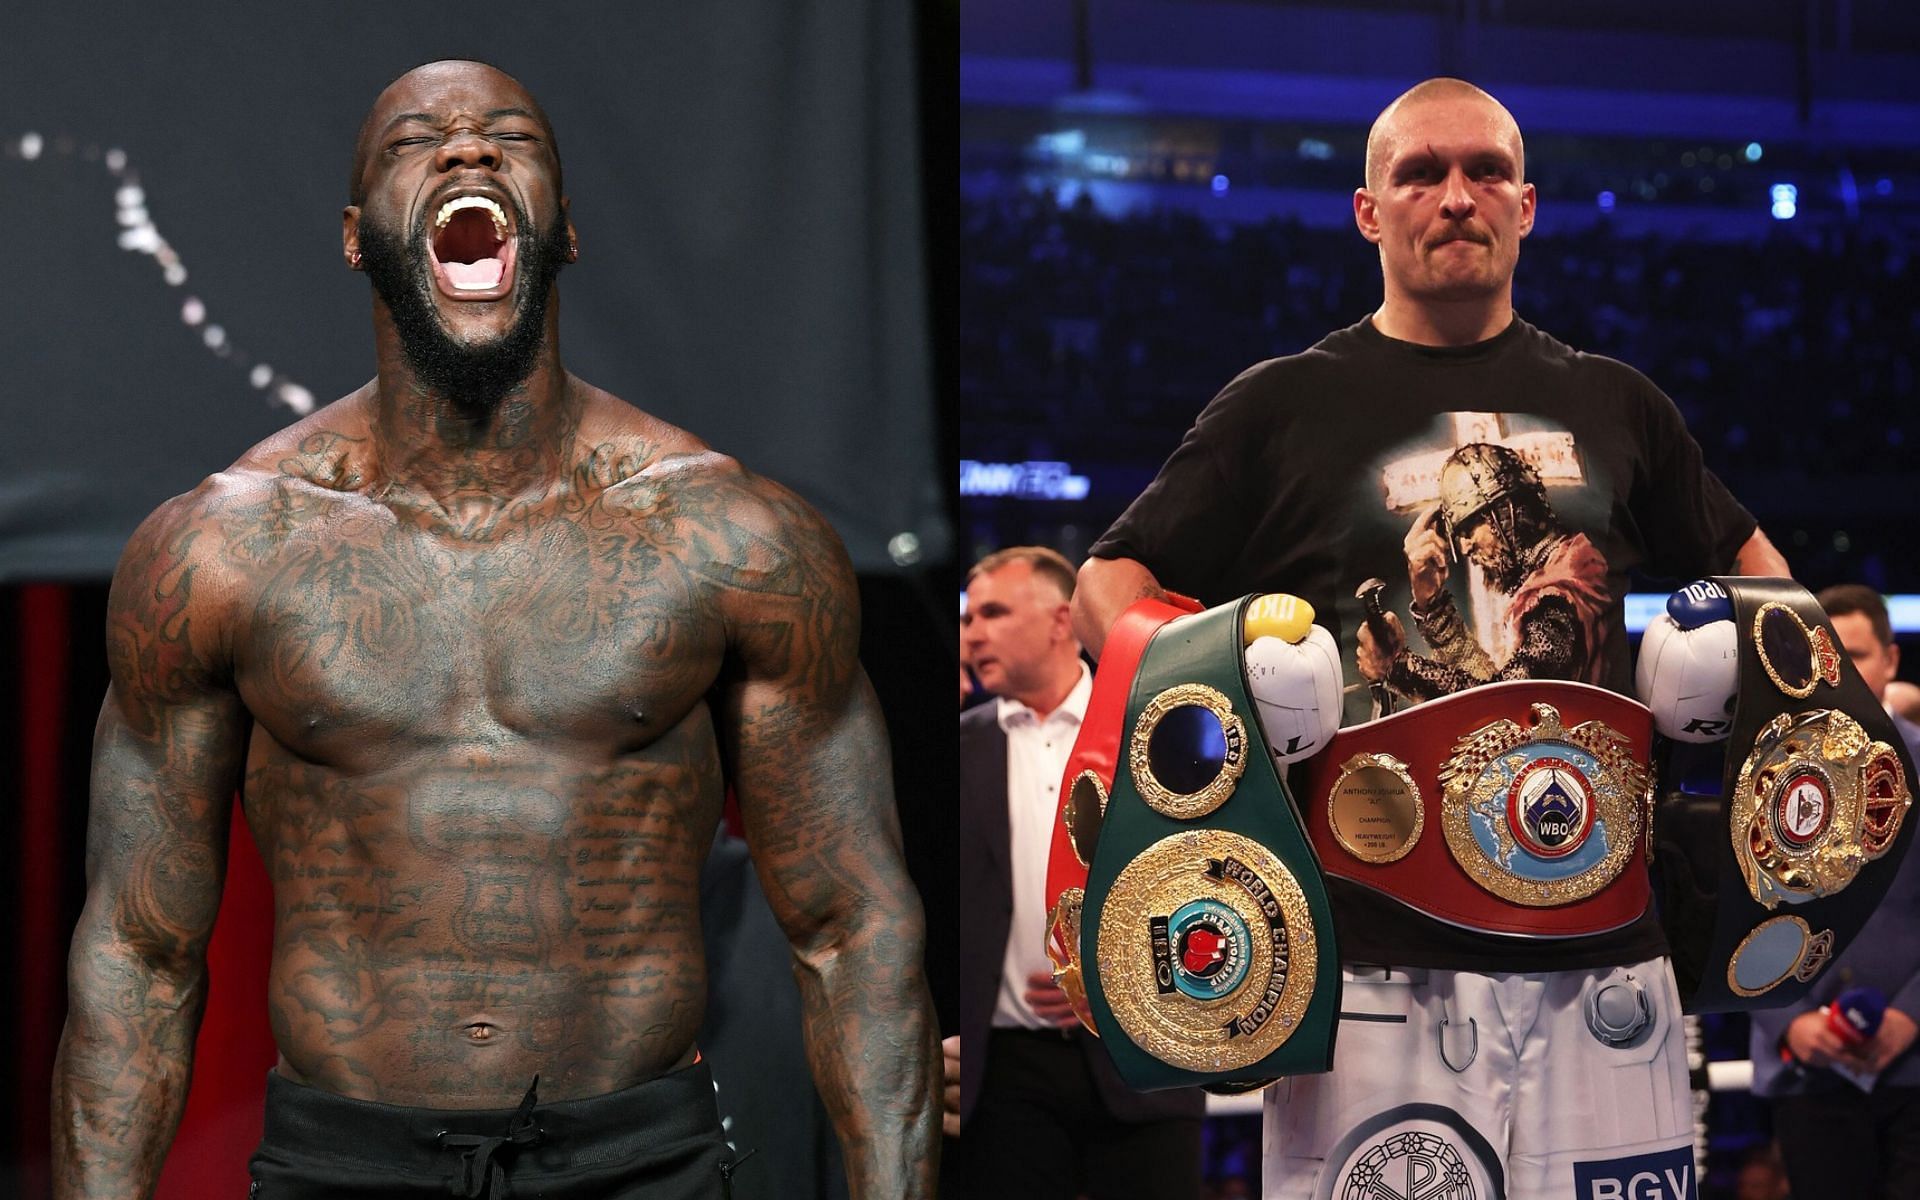 Deontay Wilder (left) and Oleksandr Usyk (right) (Image credits Getty Images)